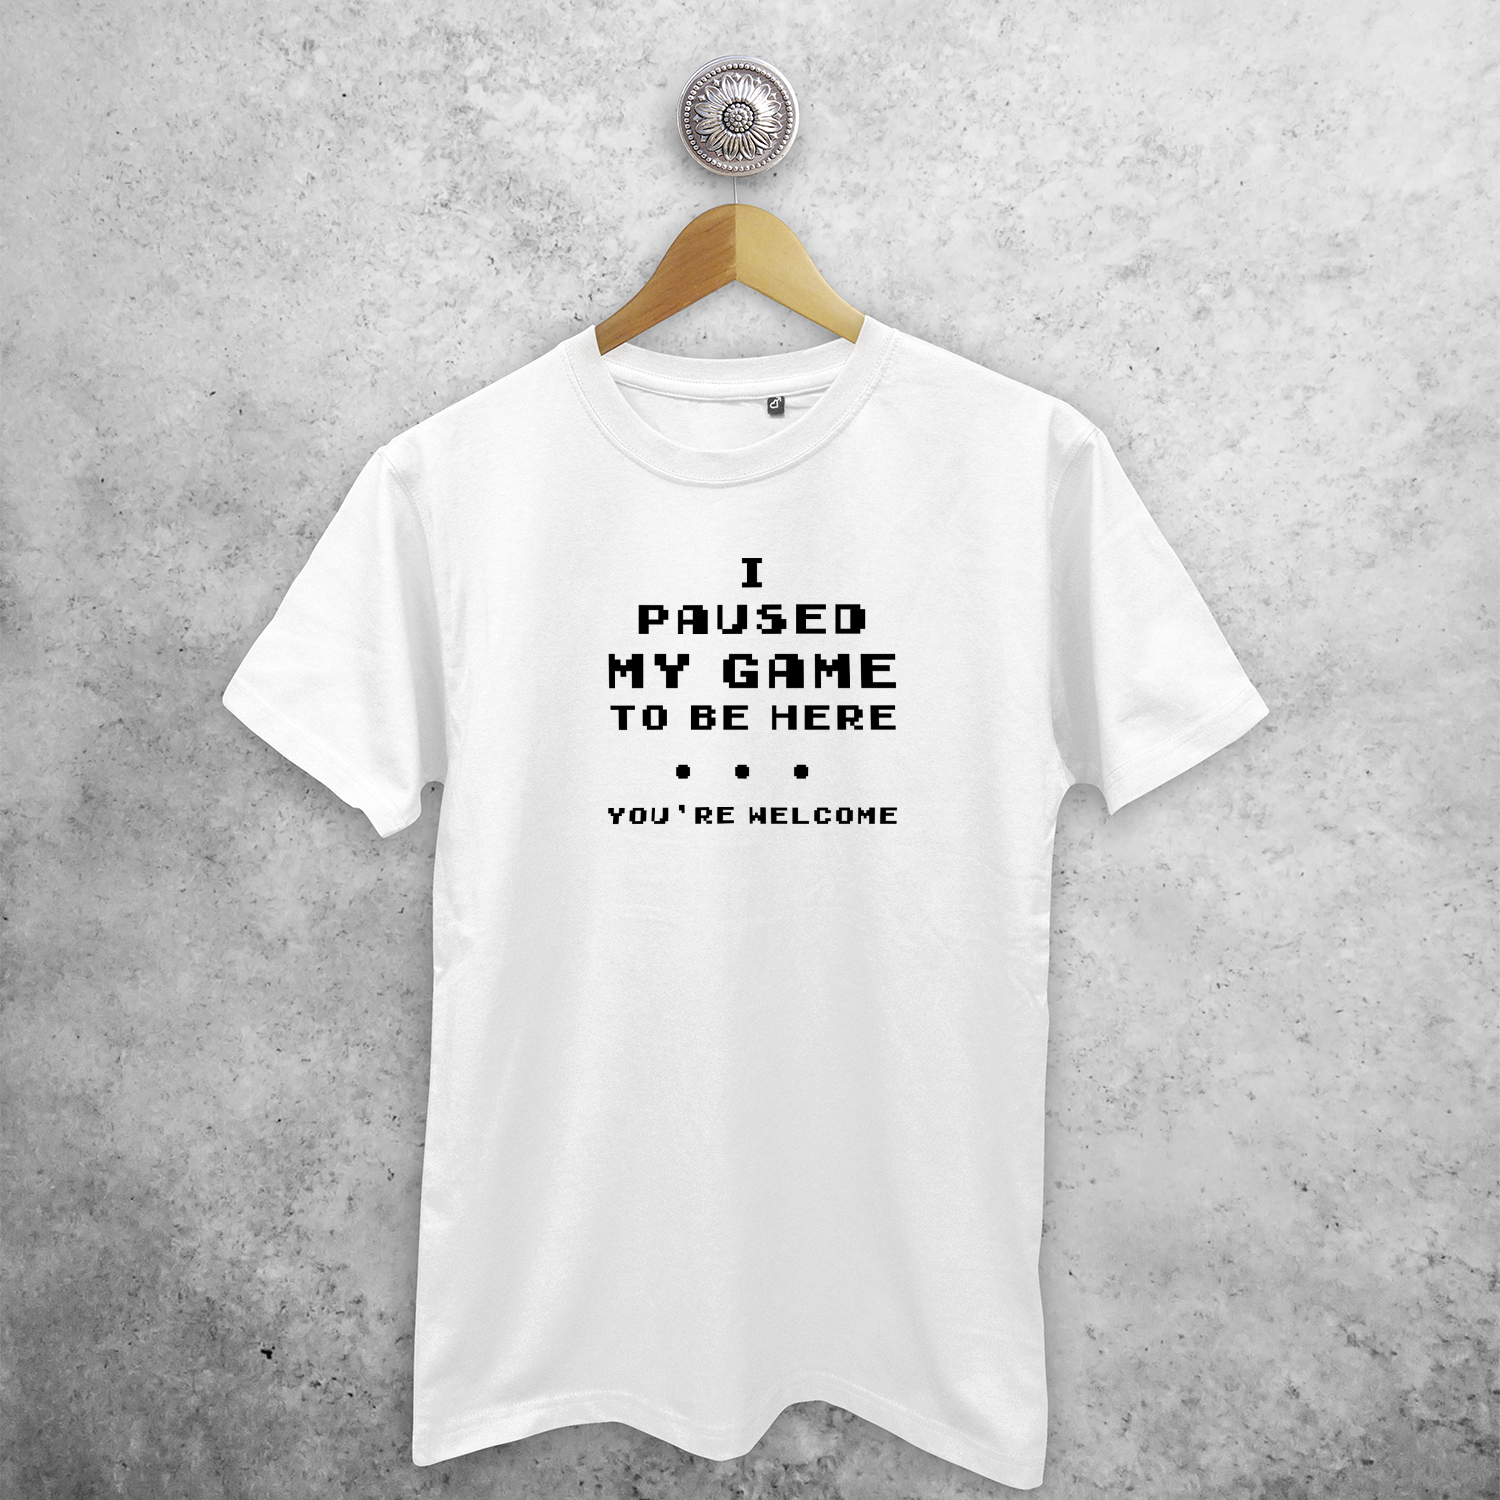 'I paused my game to be here - You're welcome' adult shirt